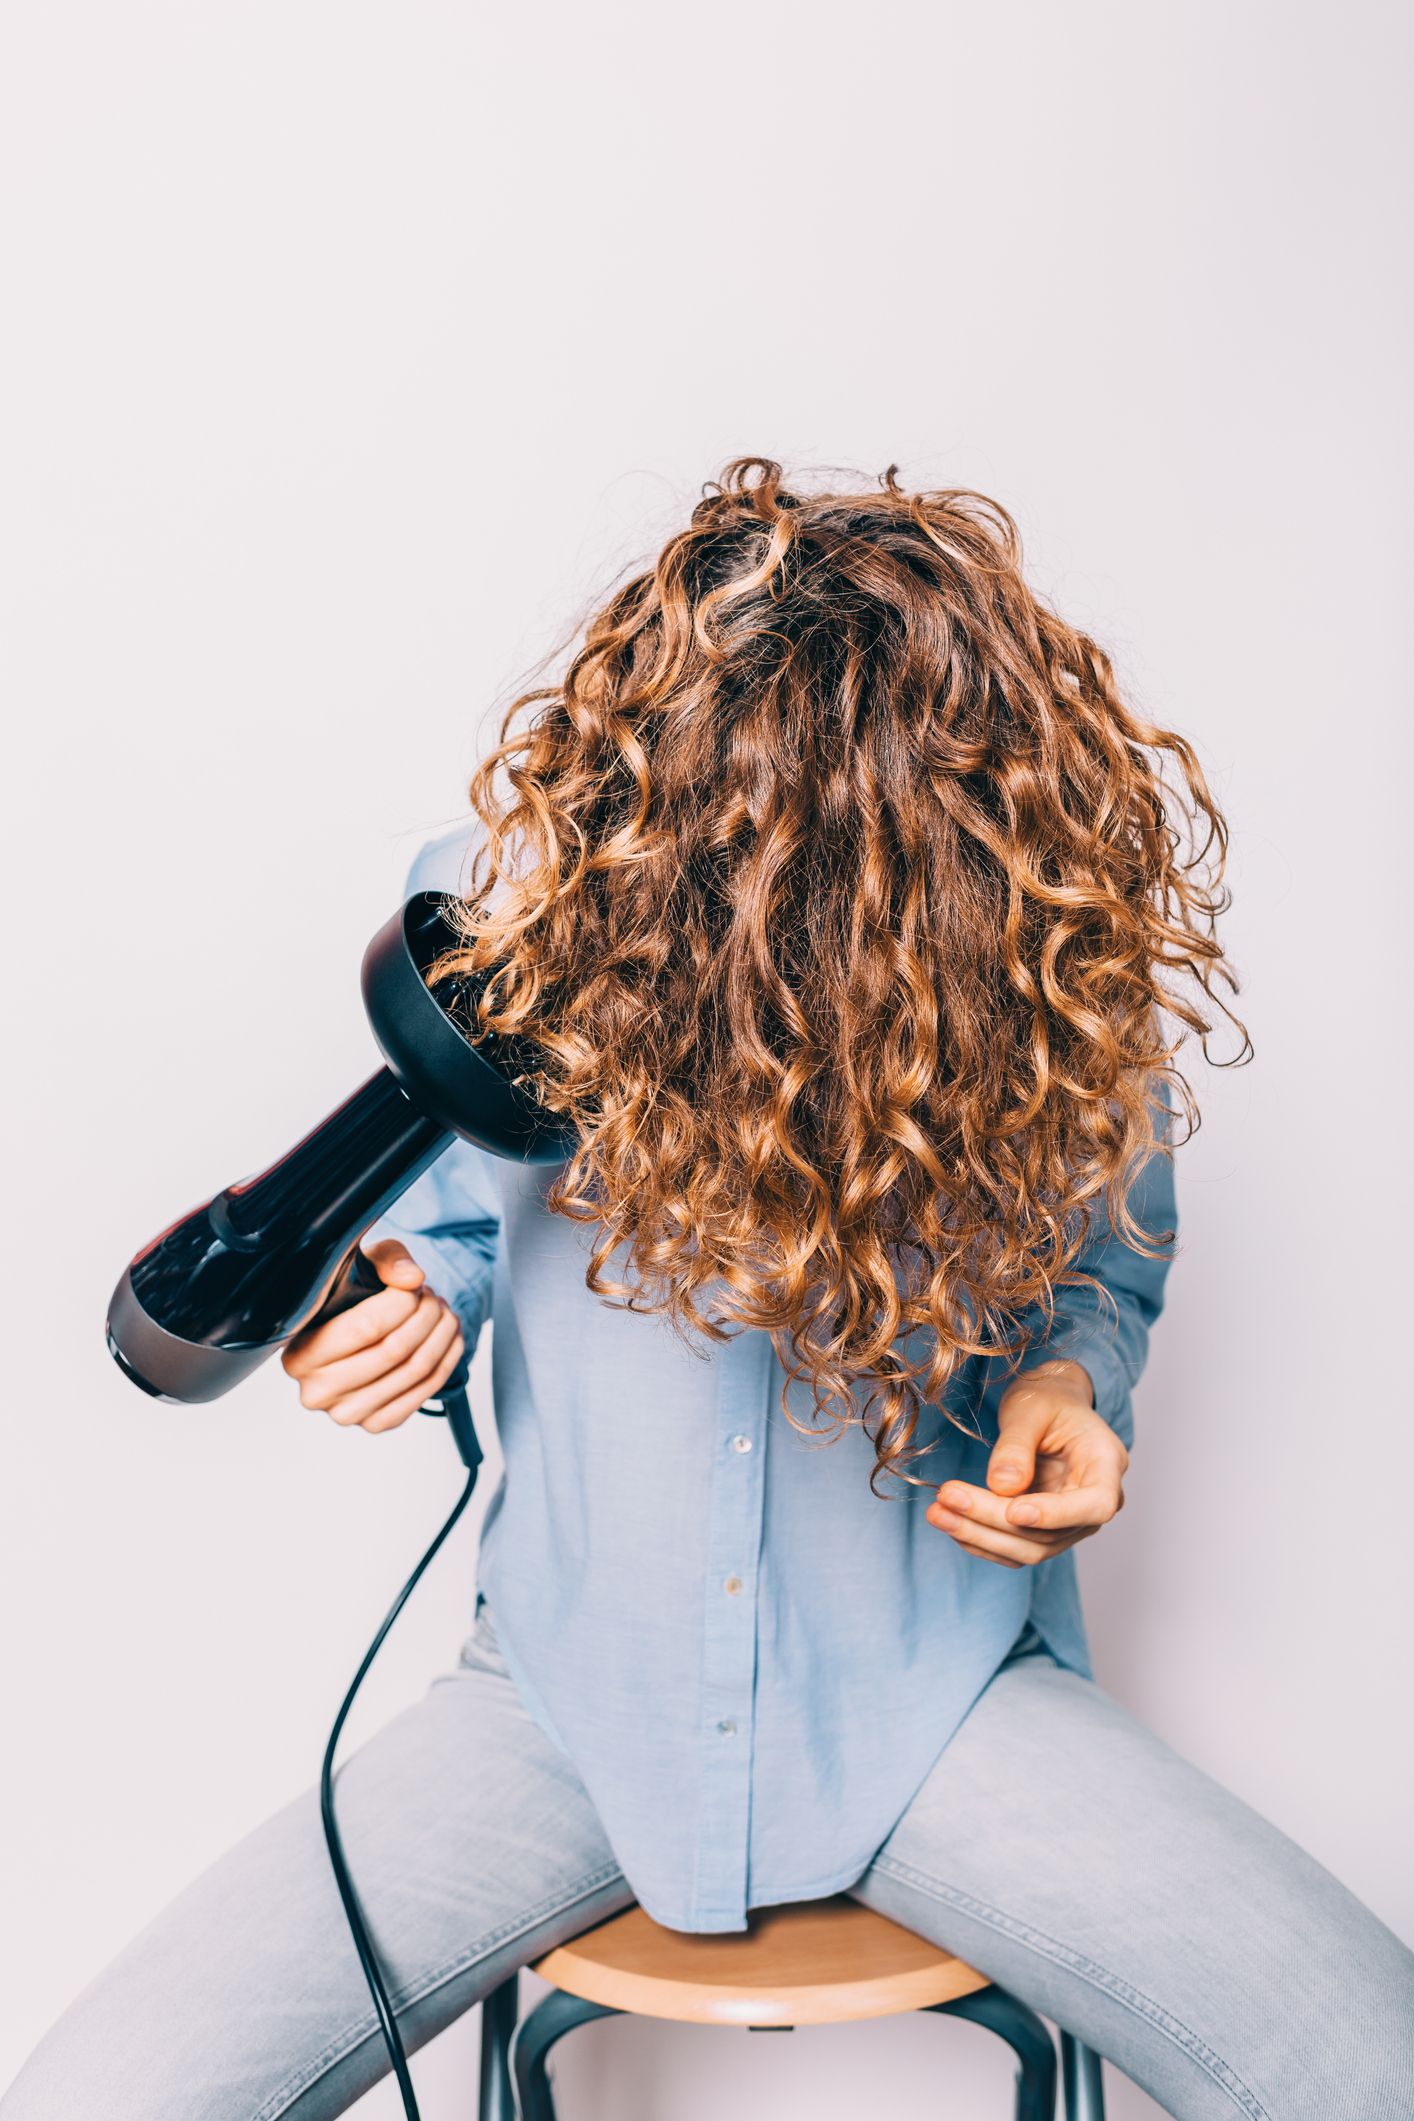 best cheap hair dryer with diffuser